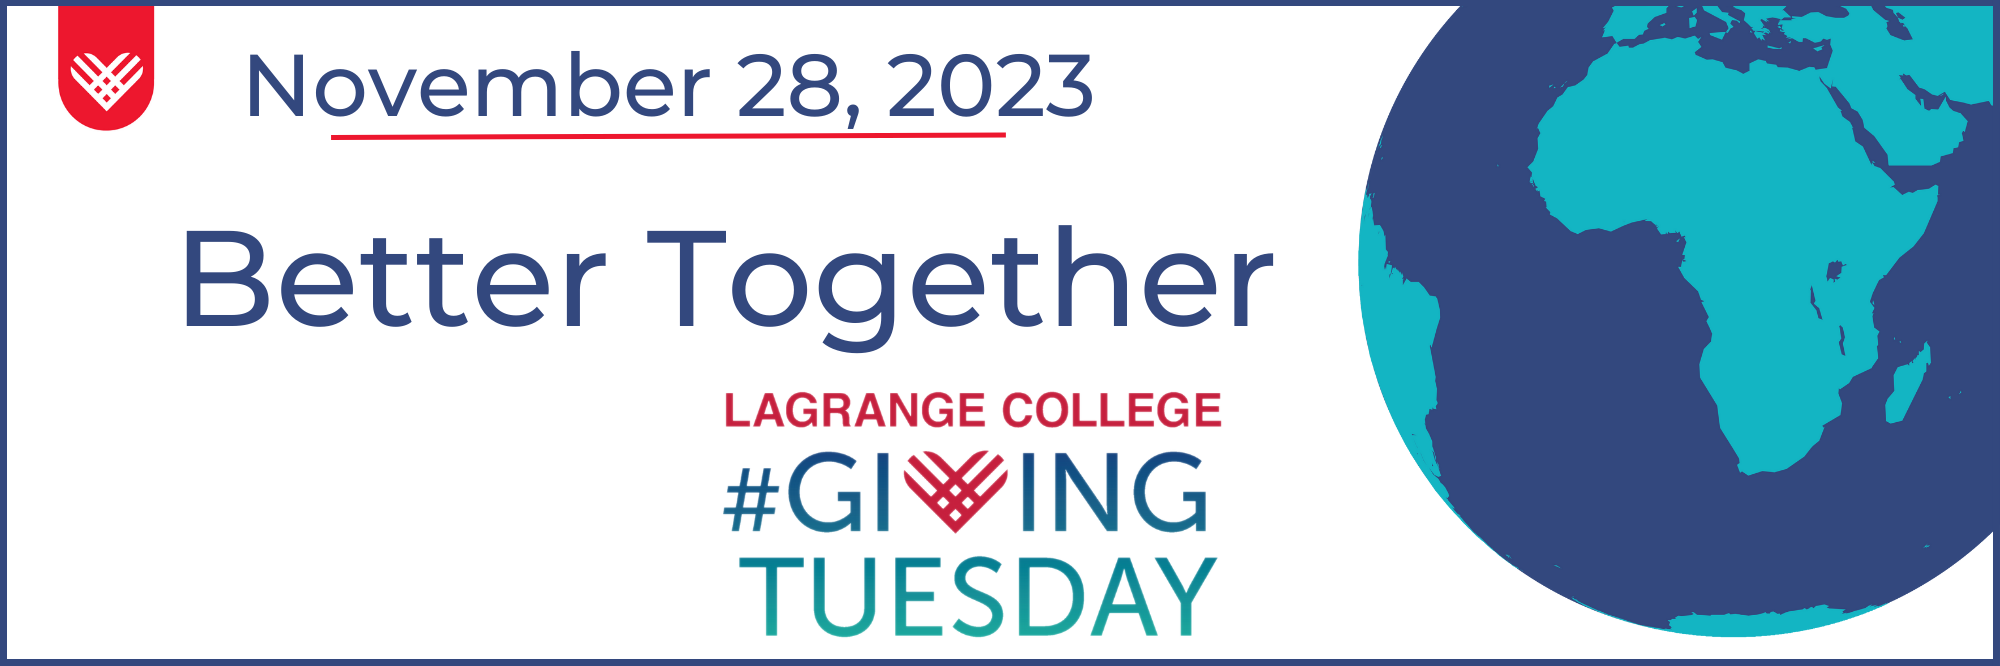 GivingTuesday-2023-Twitter-banners.png